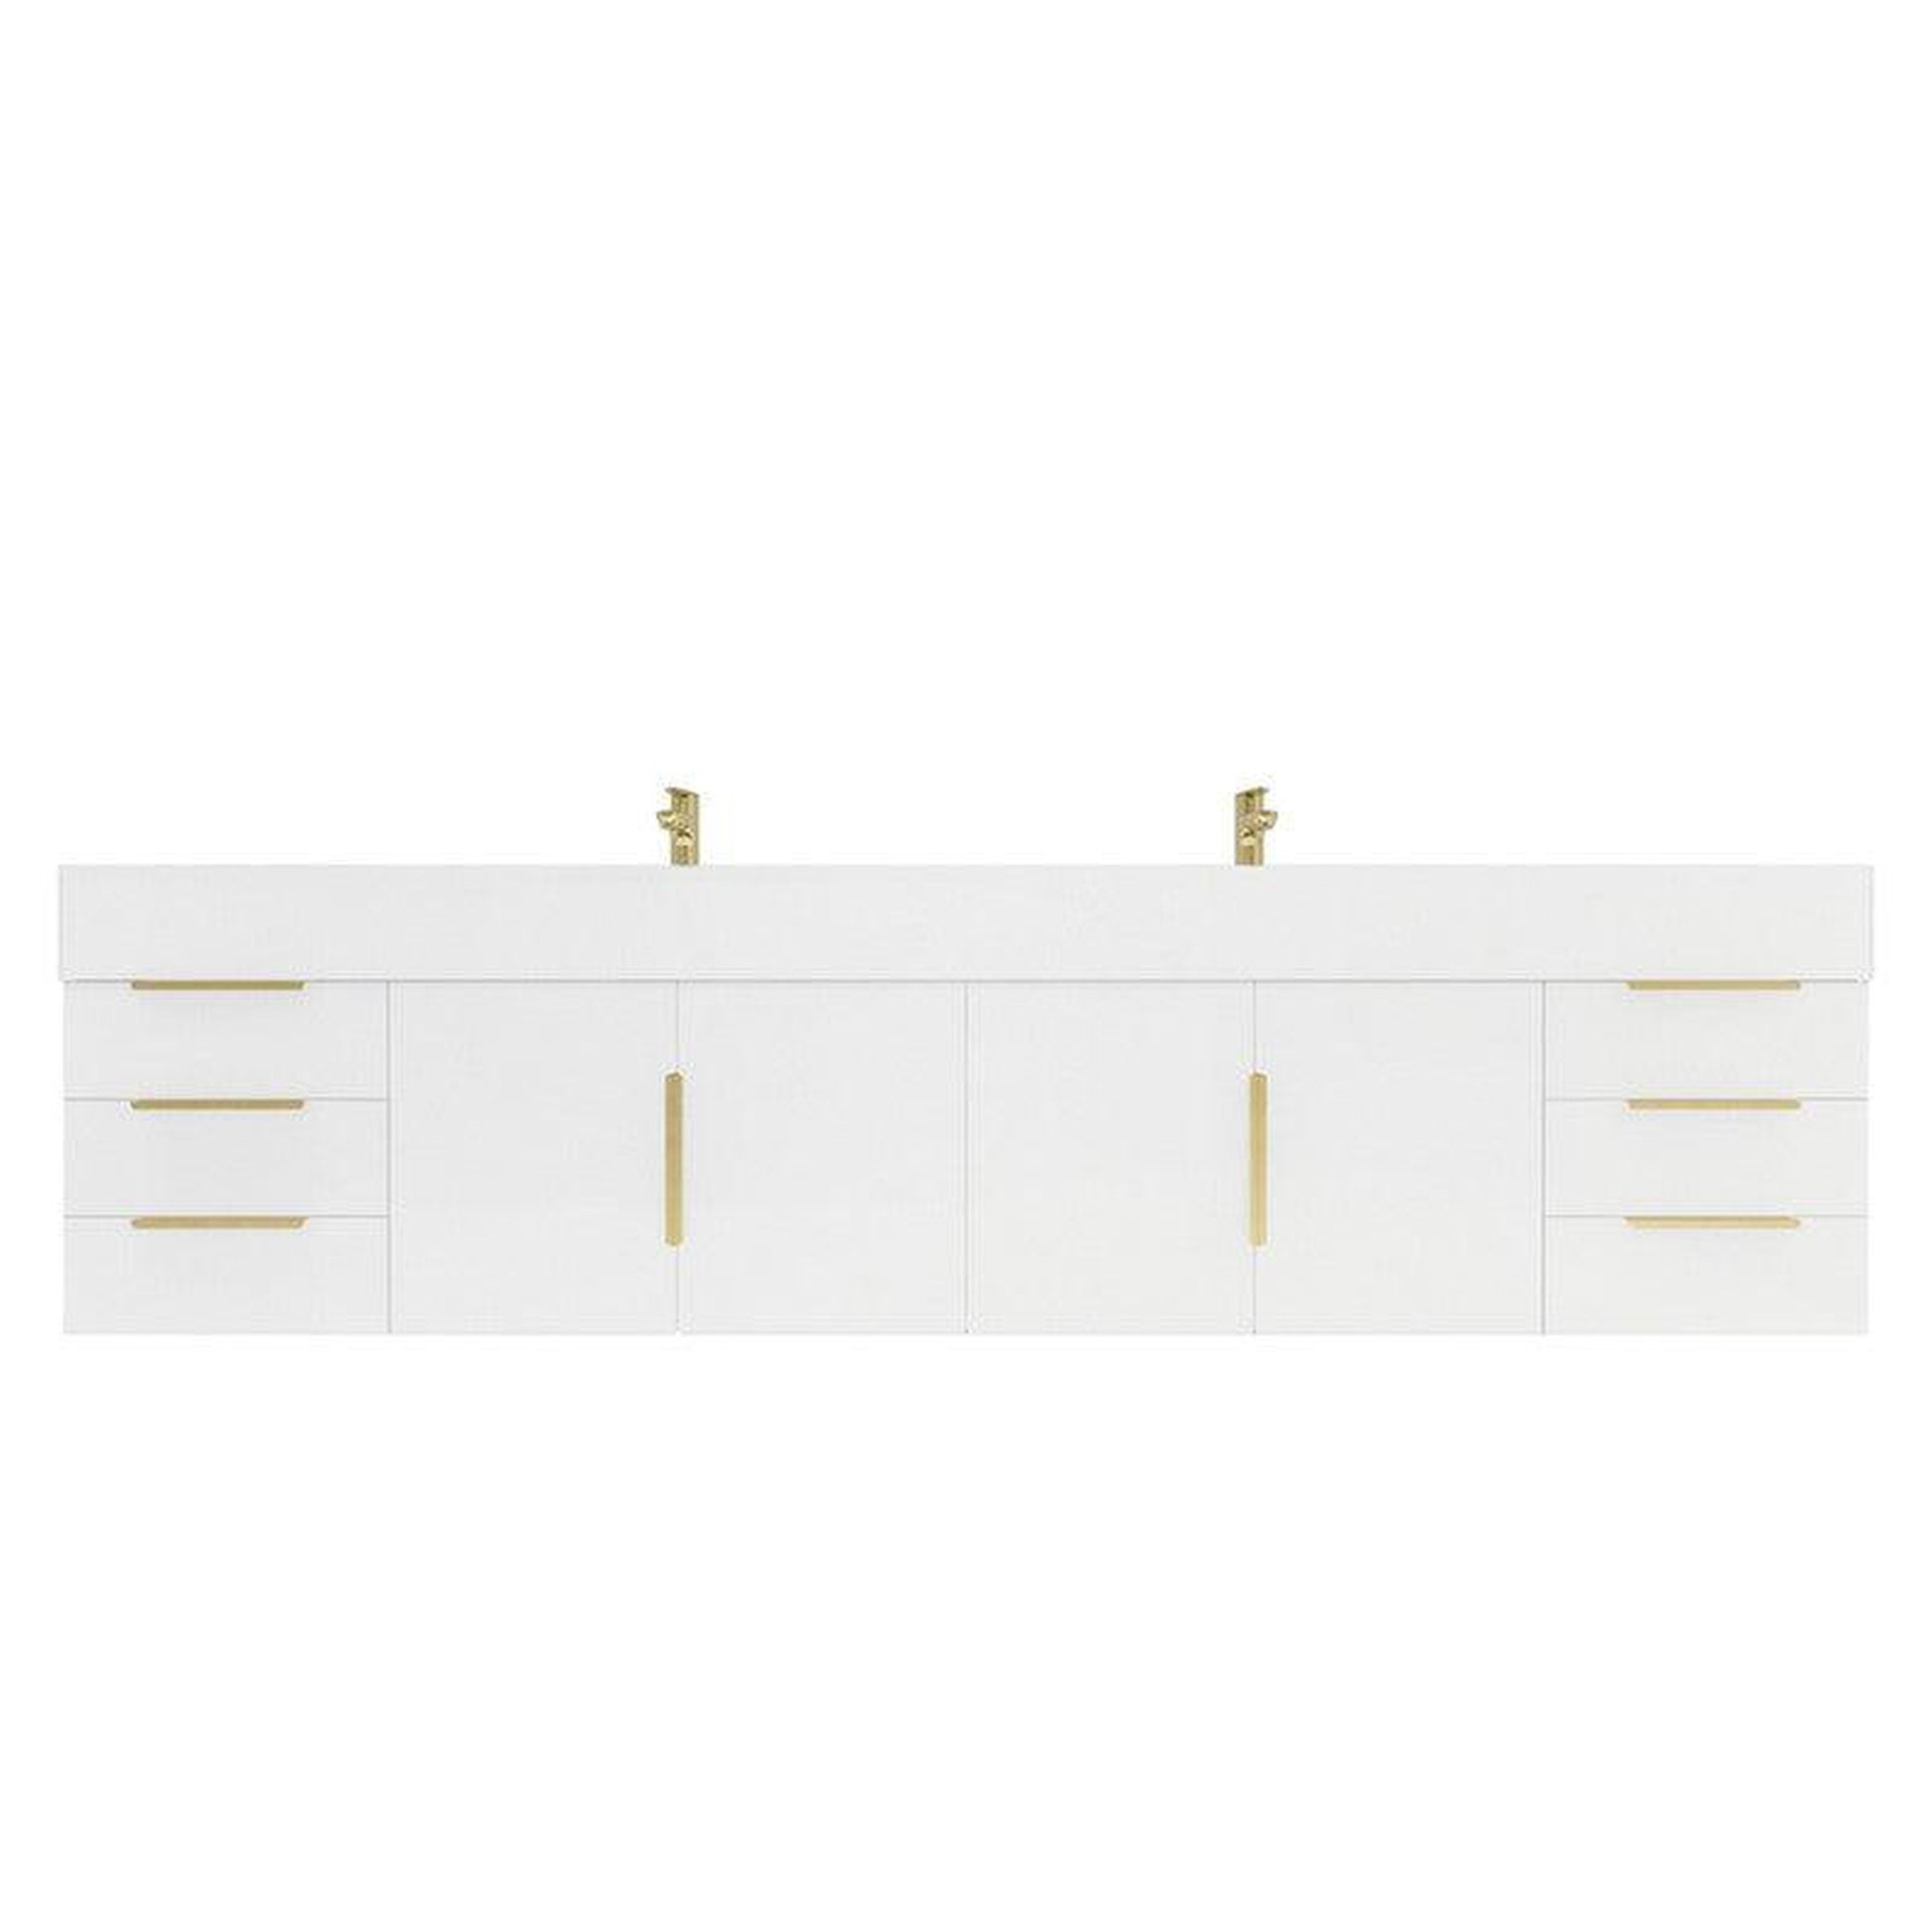 Moreno Bath Bethany 84" High Gloss White Wall-Mounted Vanity With Double Reinforced White Acrylic Sinks